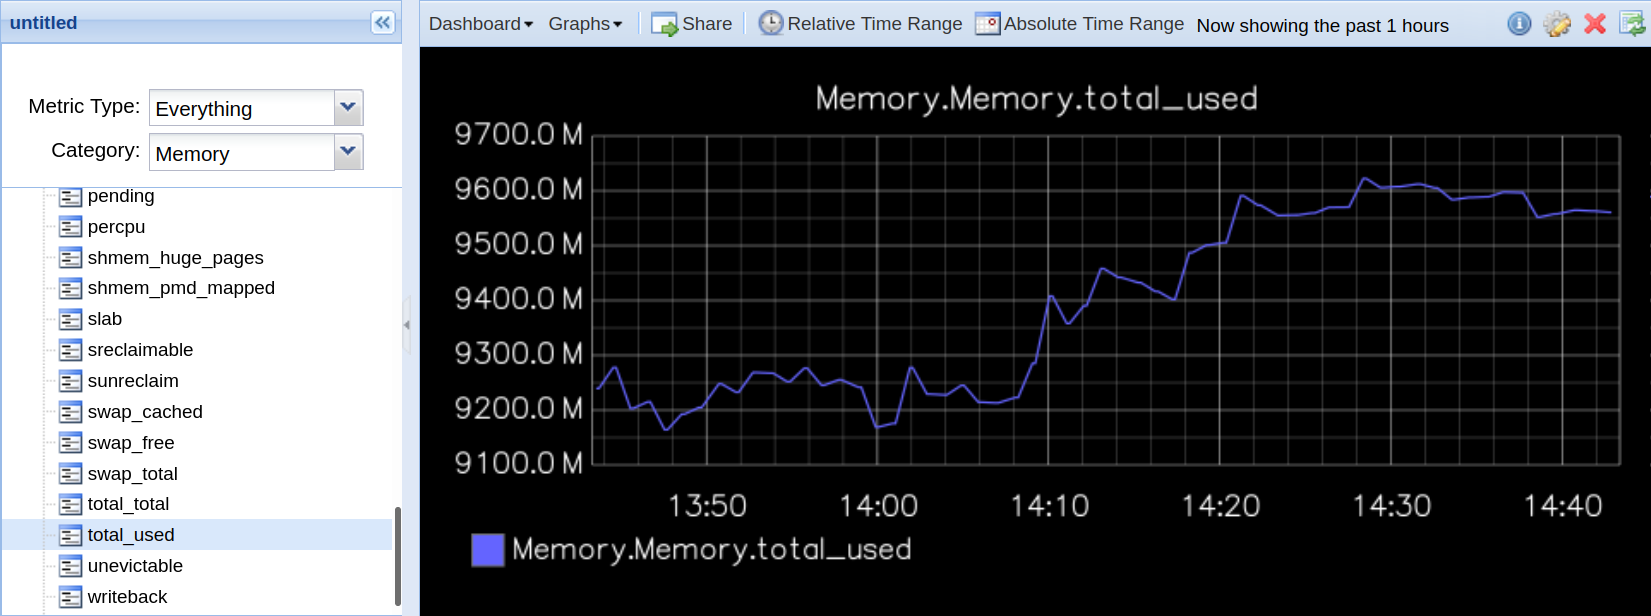 Displaying the metric for memory used in the Graphite GUI.